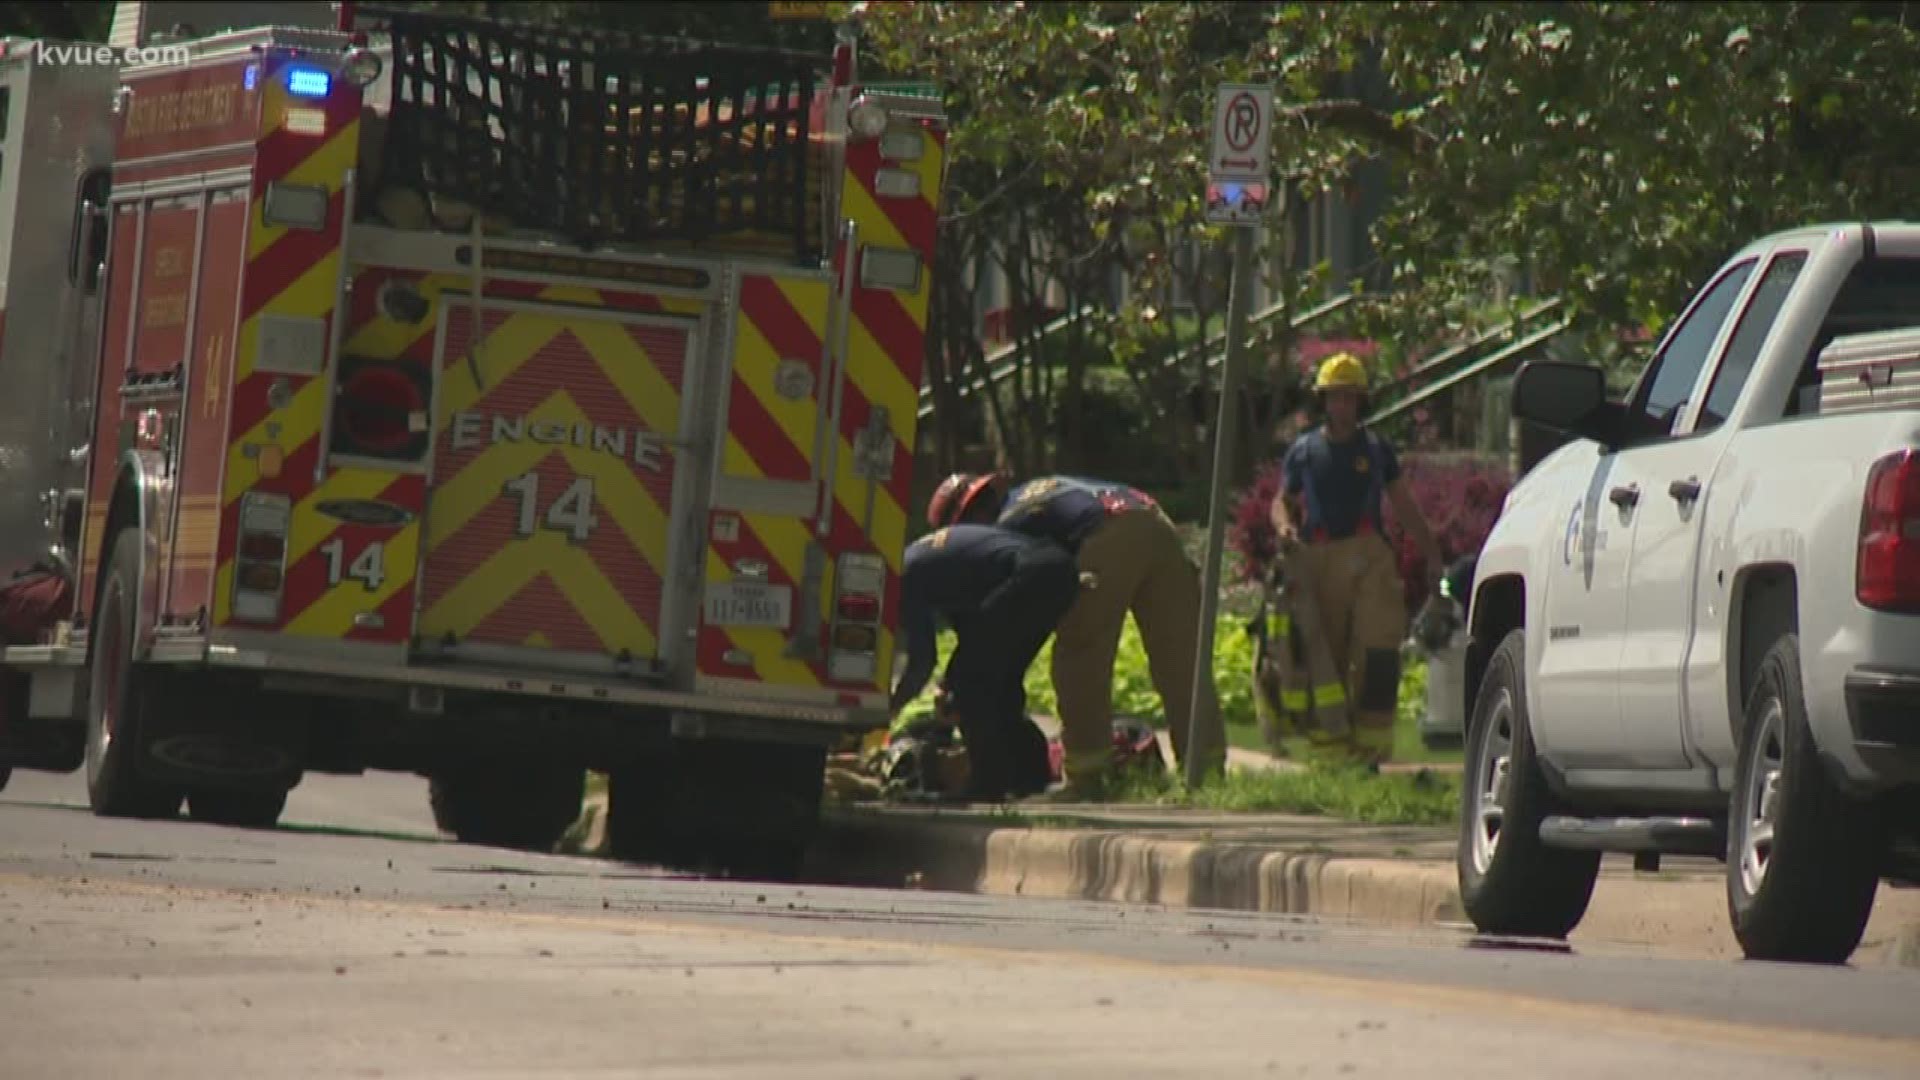 The residents of a Central Austin apartment complex are allowed to return to their homes after a temporary gas leak caused their evacuation.
The Austin Fire Department reported at 2:35 p.m. that the six-inch gas line struck by a private utility contractor